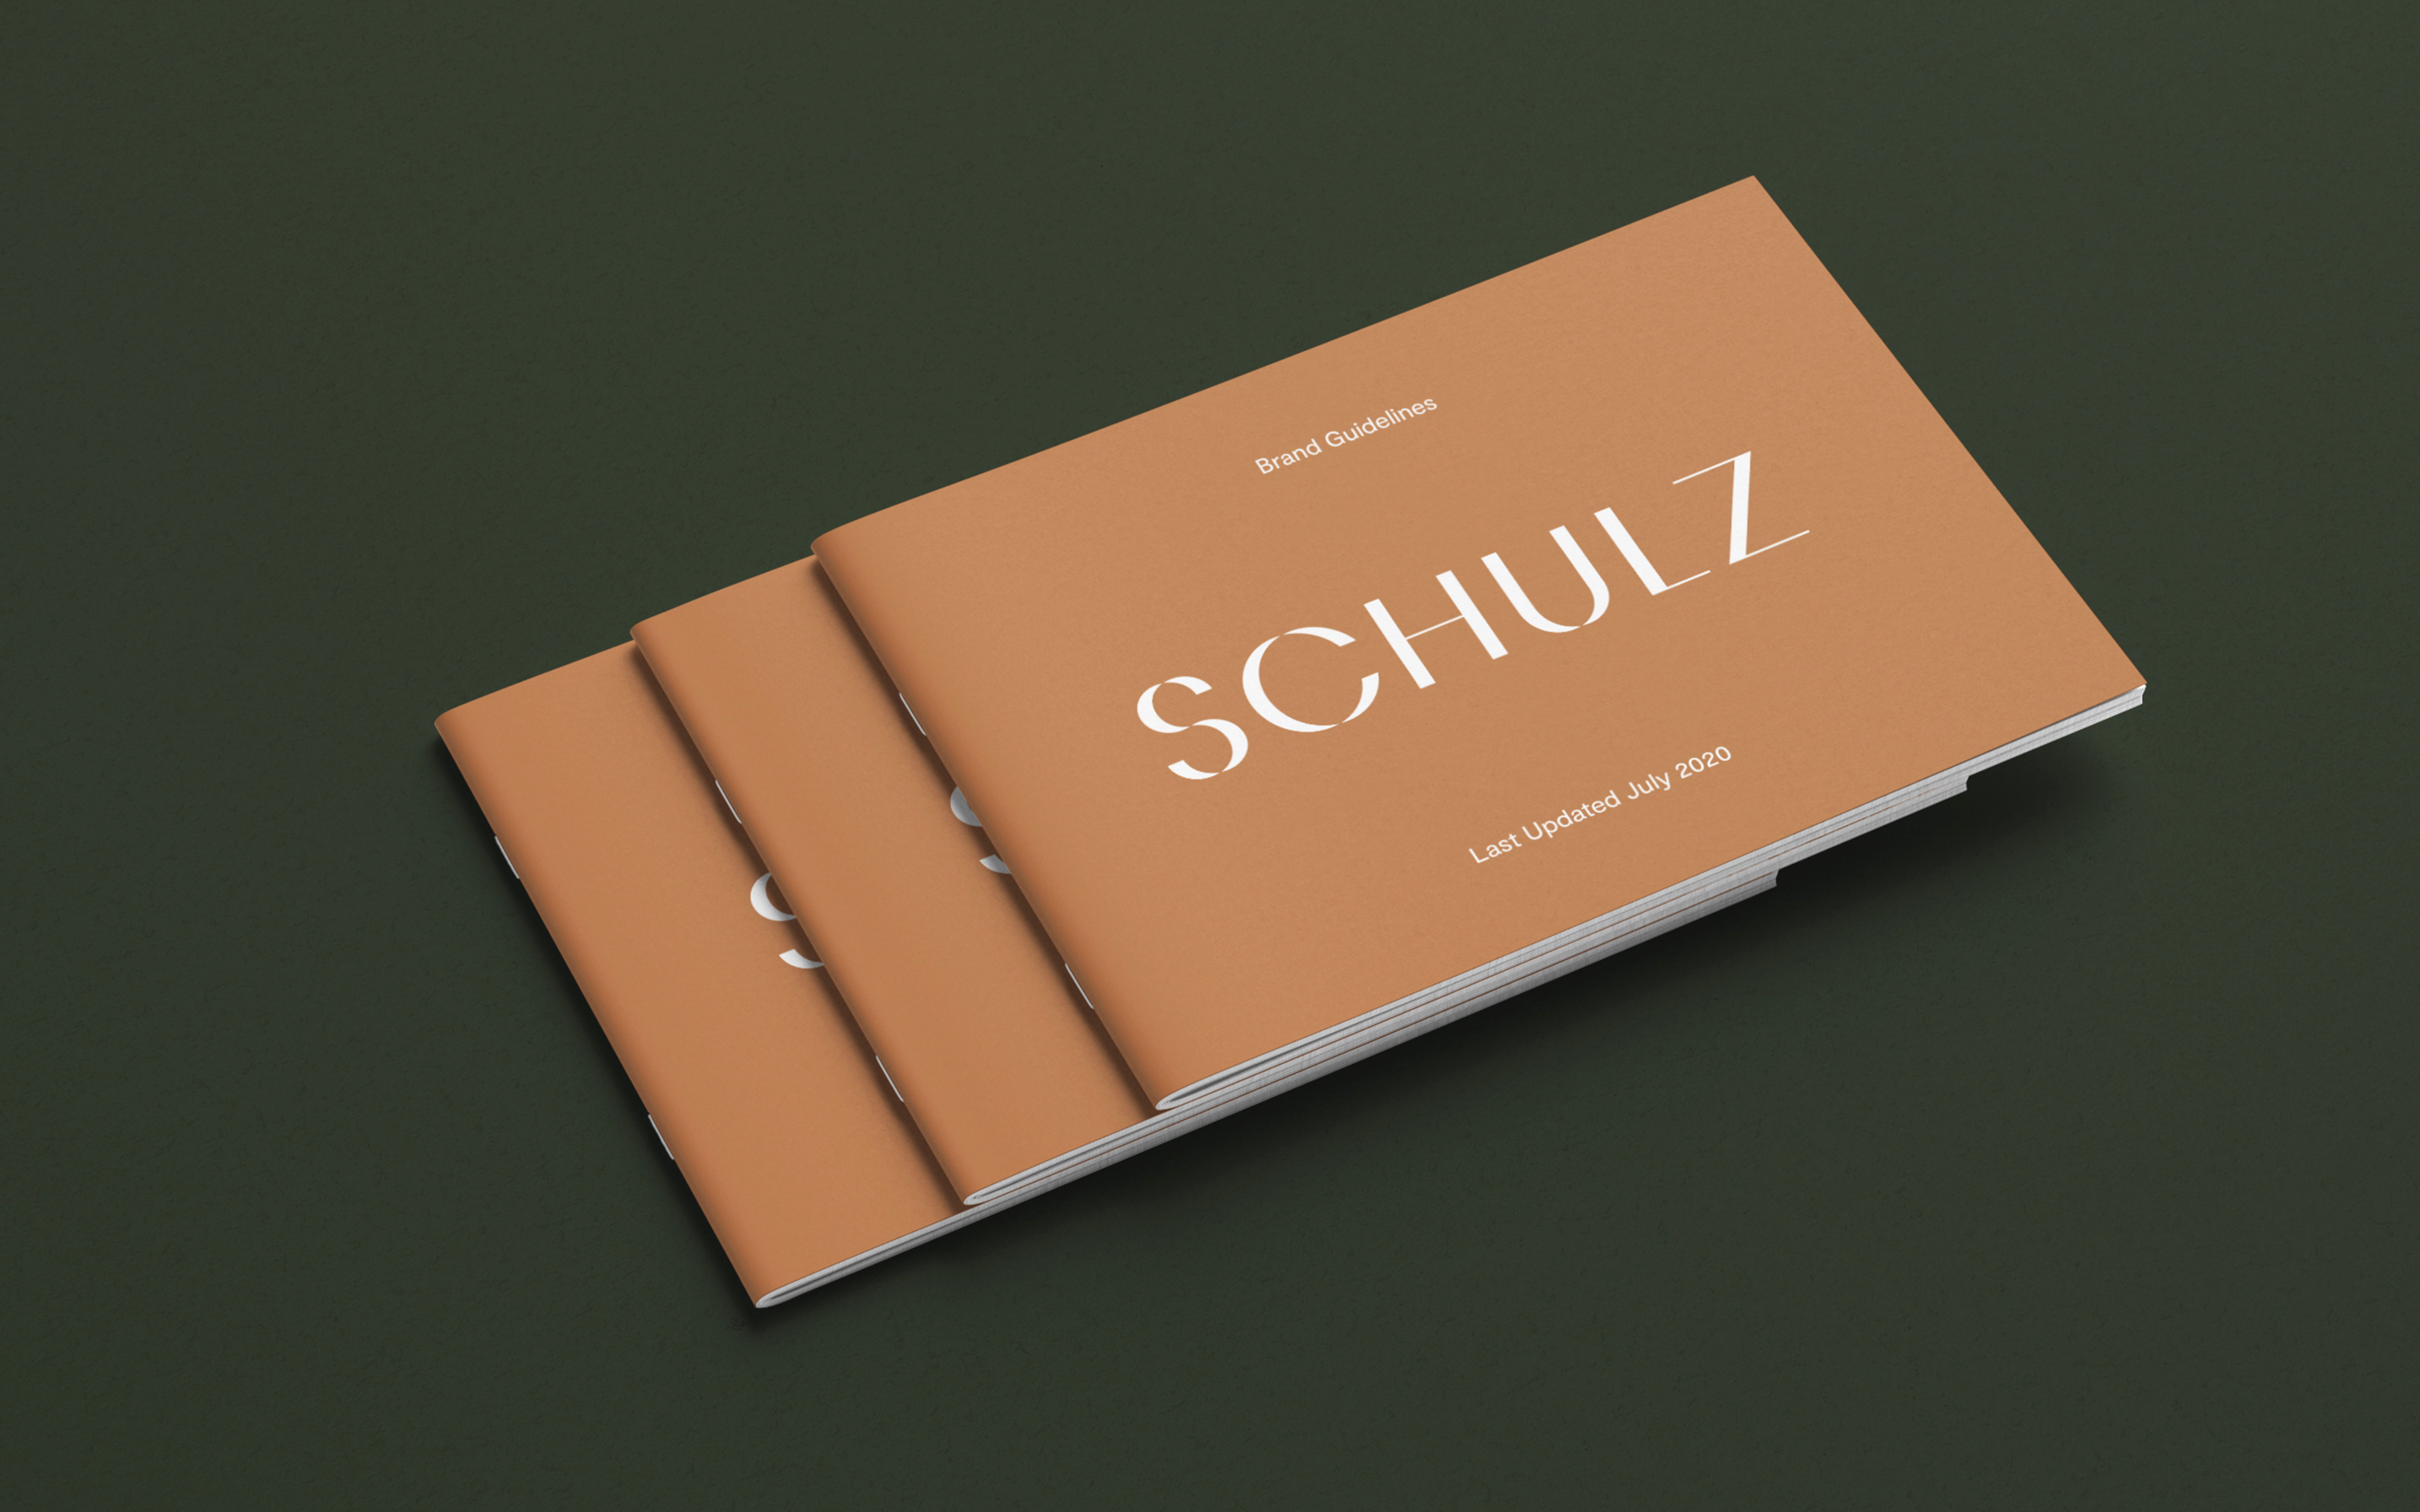 schulz equestrian bags brand guidelines